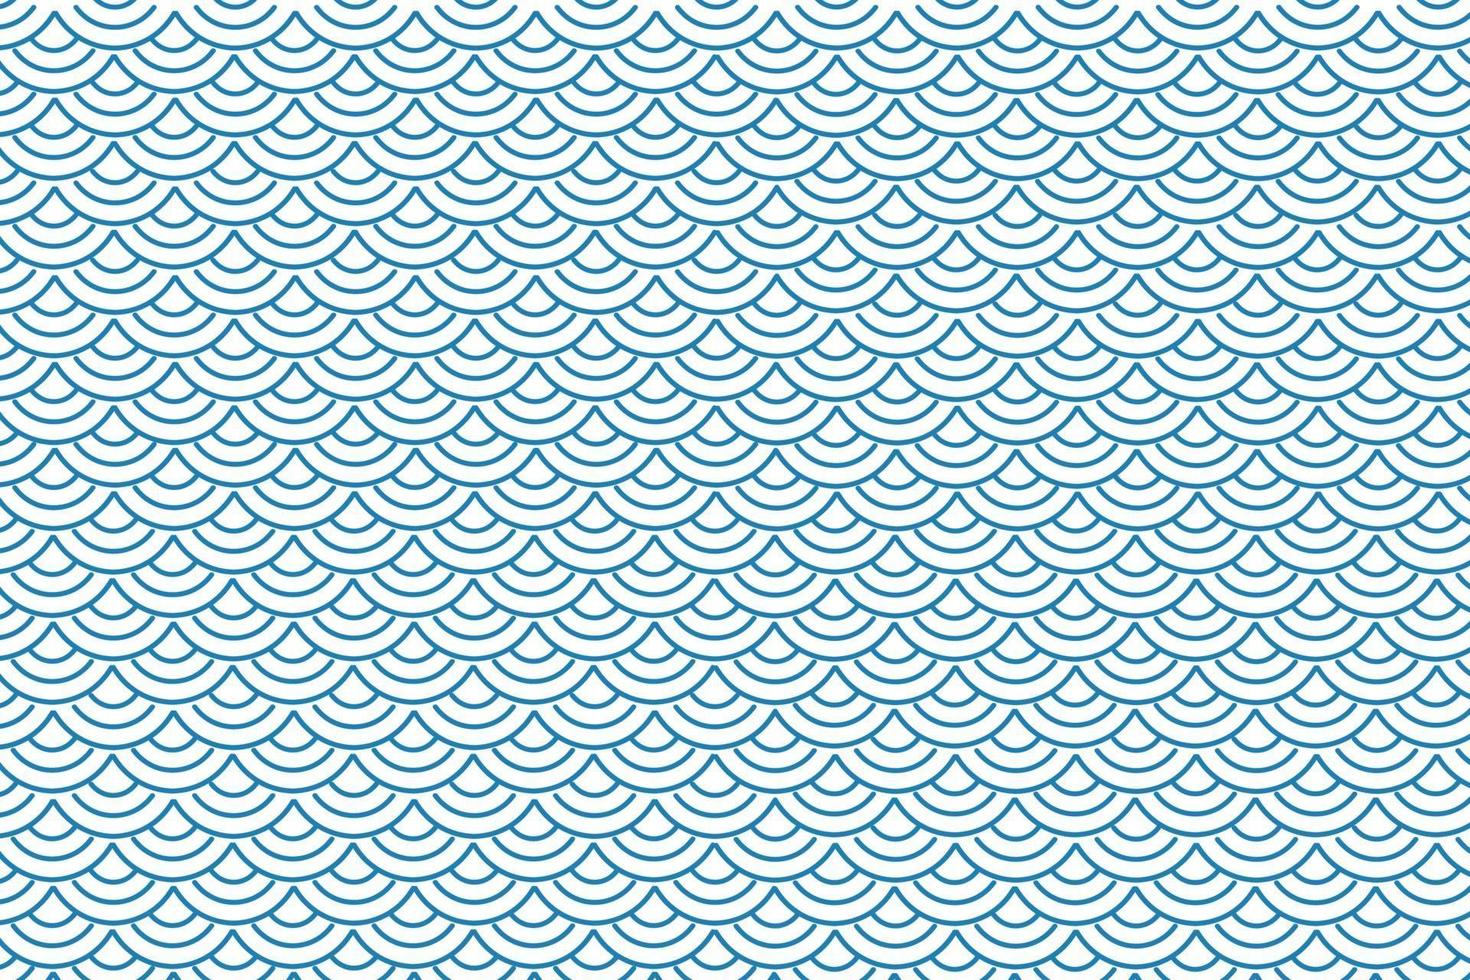 Abstract Fish Scale Pattern vector